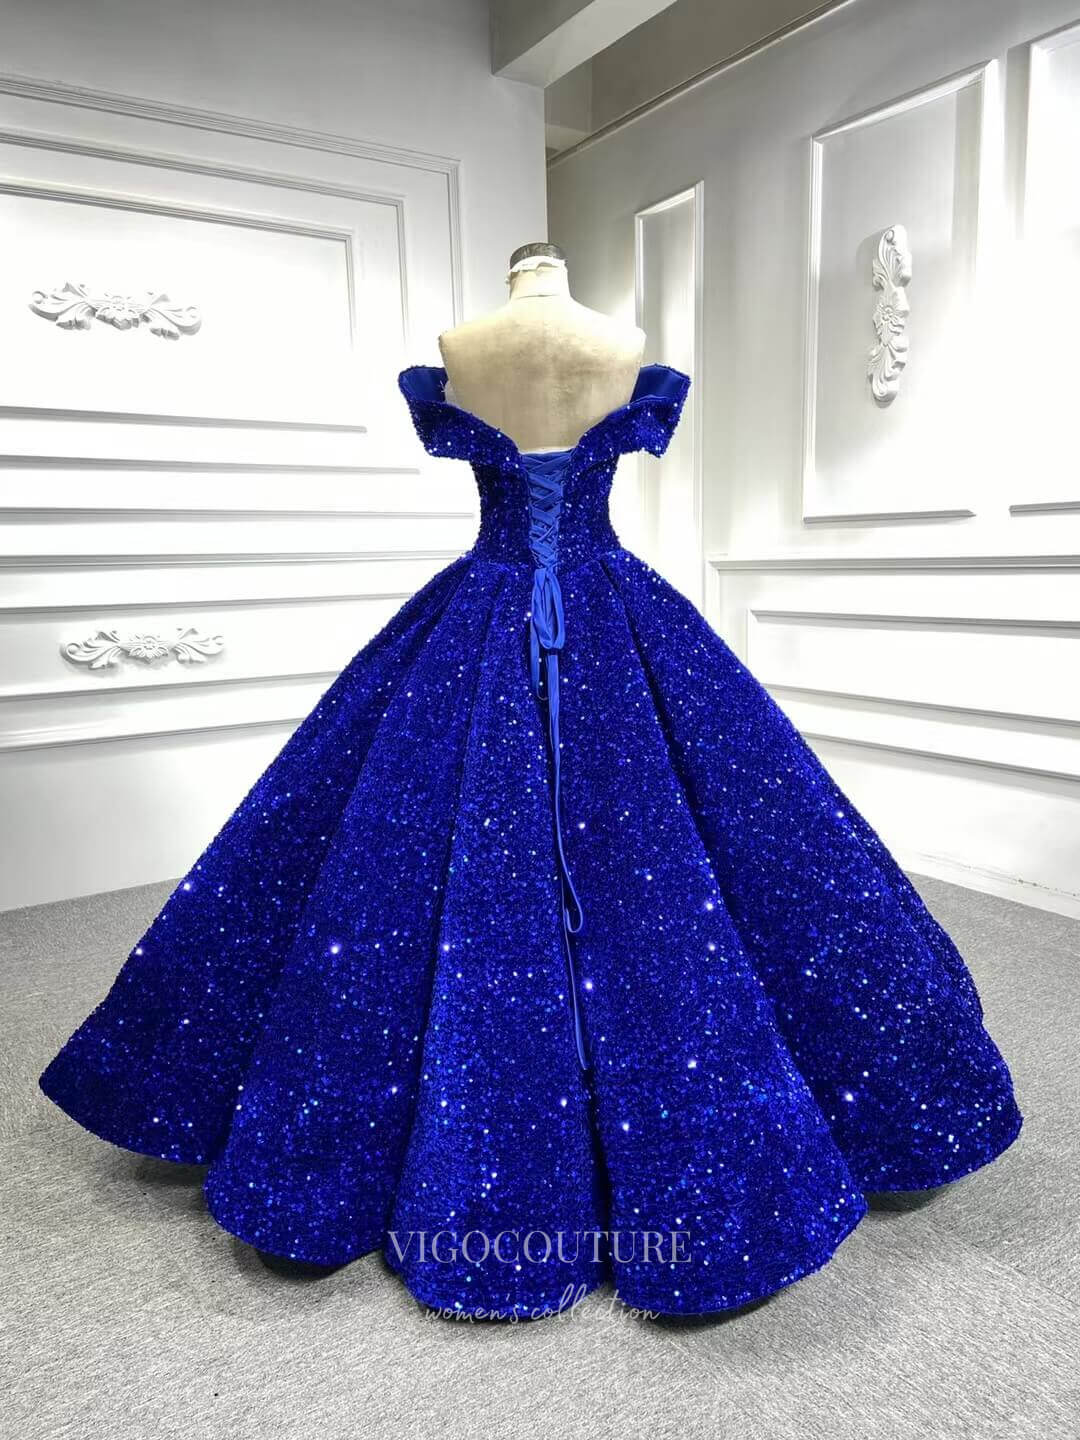 vigocouture-Sequin Ball Gown Off the Shoulder Formal Dresses 66536-Prom Dresses-vigocouture-